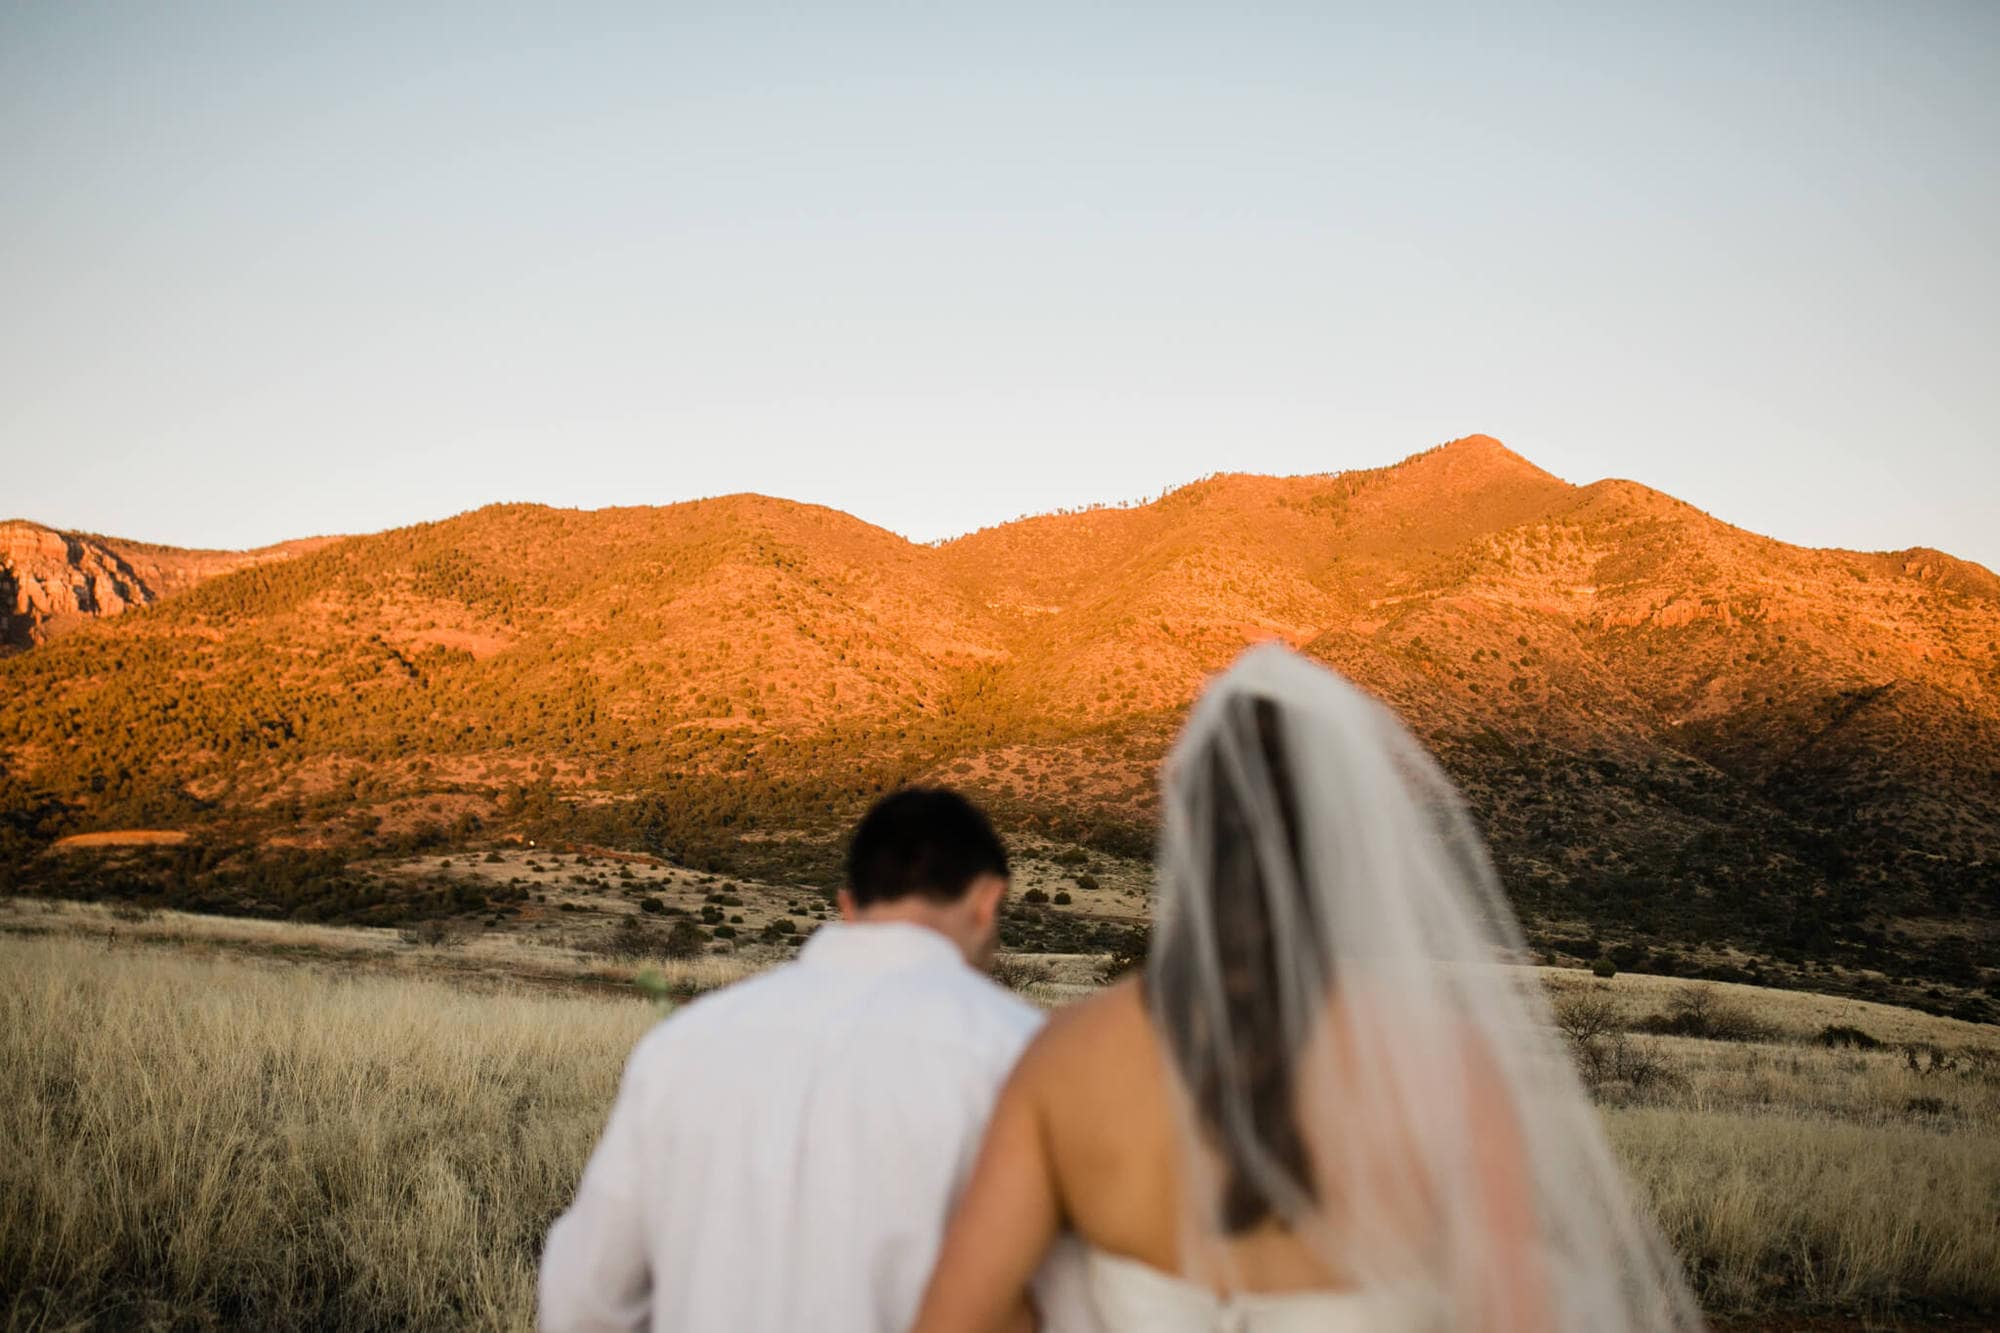 There are tons of gorgeous places to elope in the desert, but this gorgeous overlook is special. If you're looking for an off-the-beaten-path for your elopement, this inspiration is for you.